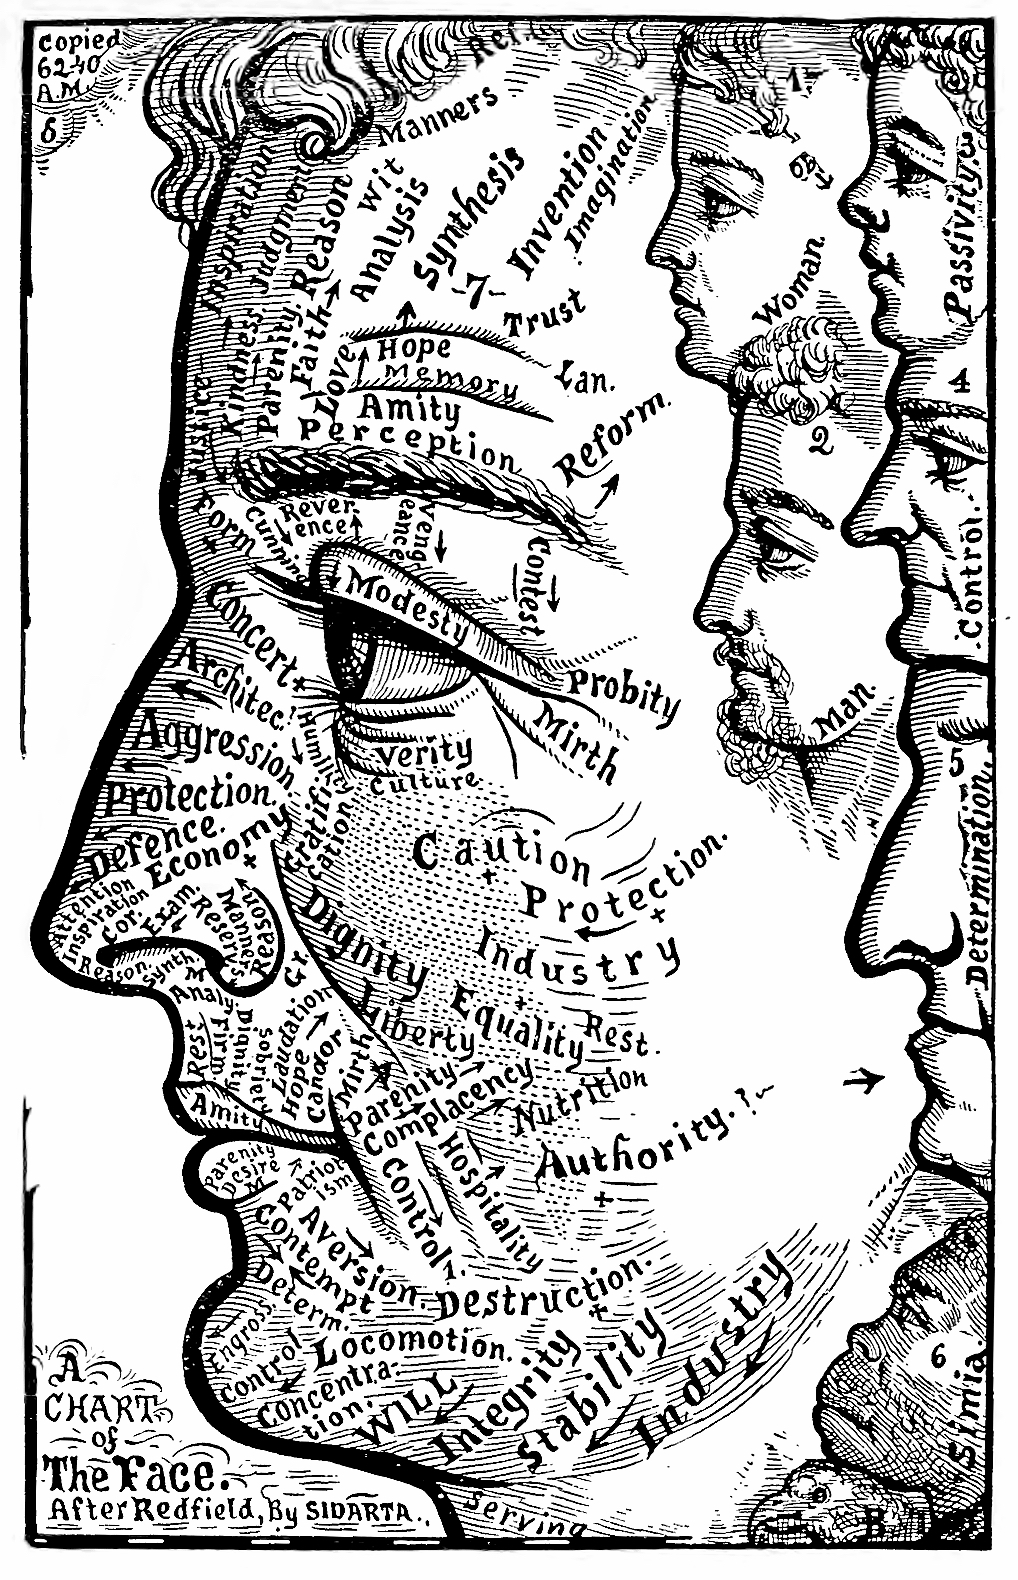 35_chart_of_the_face_1884.jpg